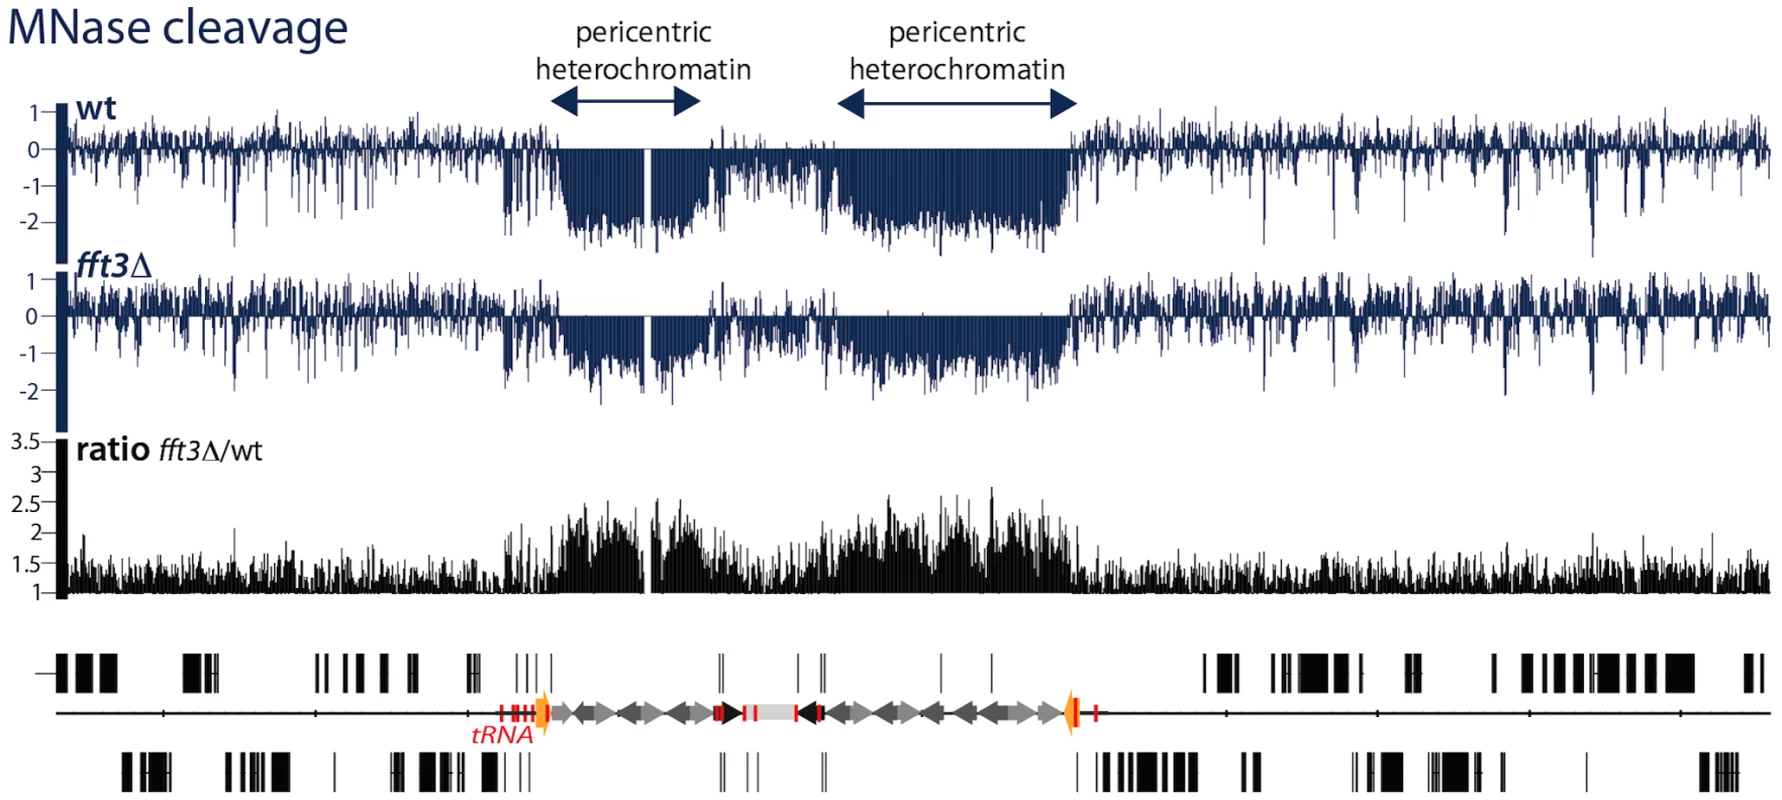 Fft3 is affecting chromatin structure at pericentric heterochromatin.